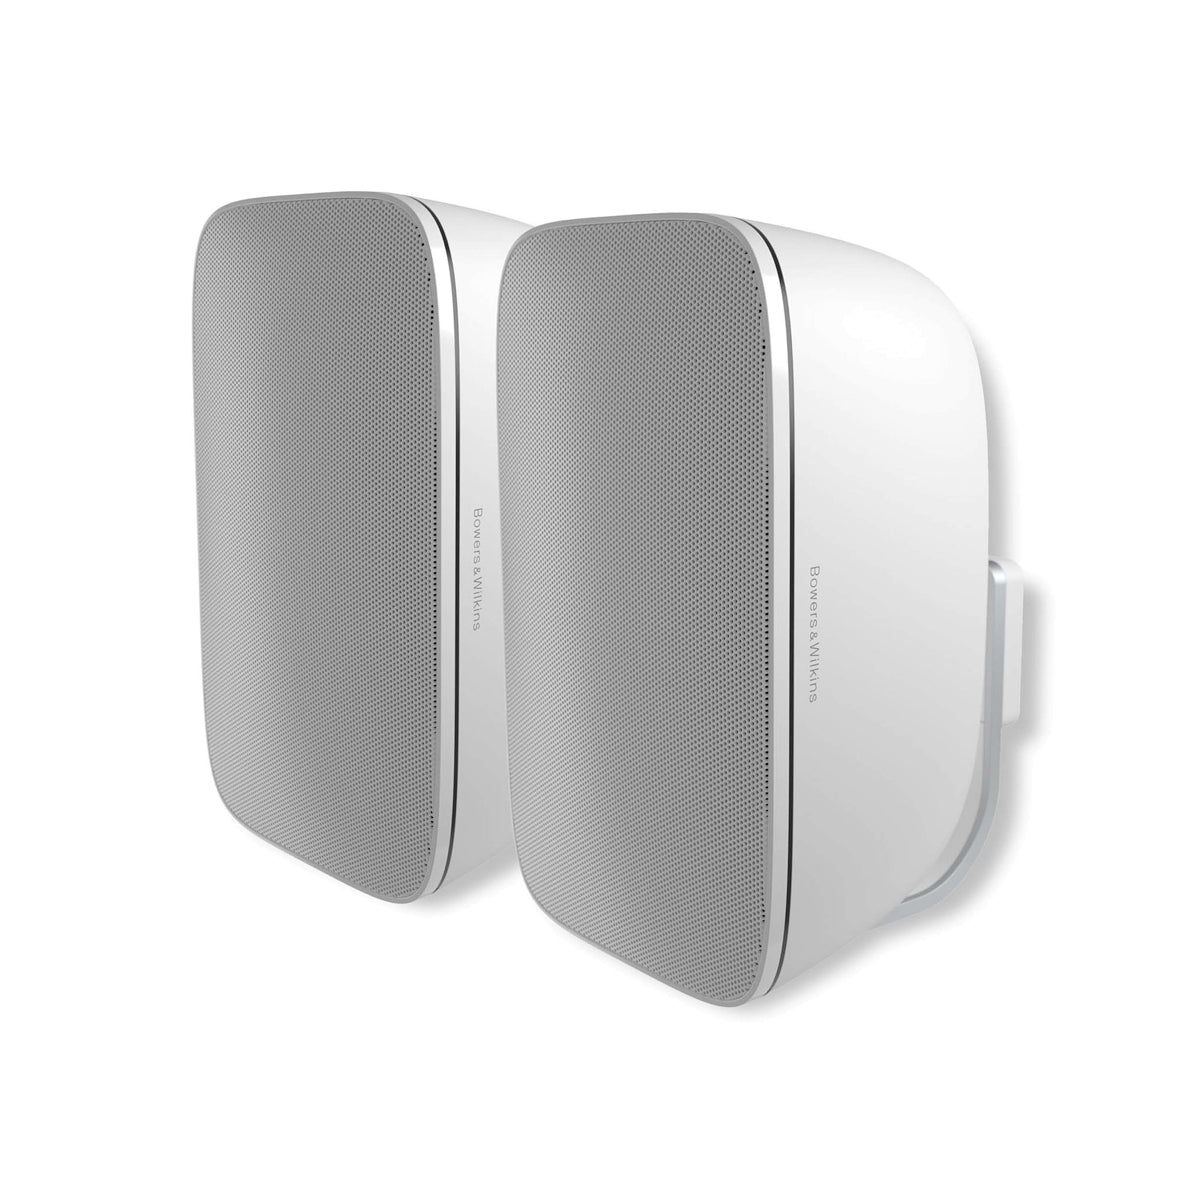 Bowers & Wilkins AM1 Outdoor Weather-Proof Speakers/Pair - White - The Audio Experts